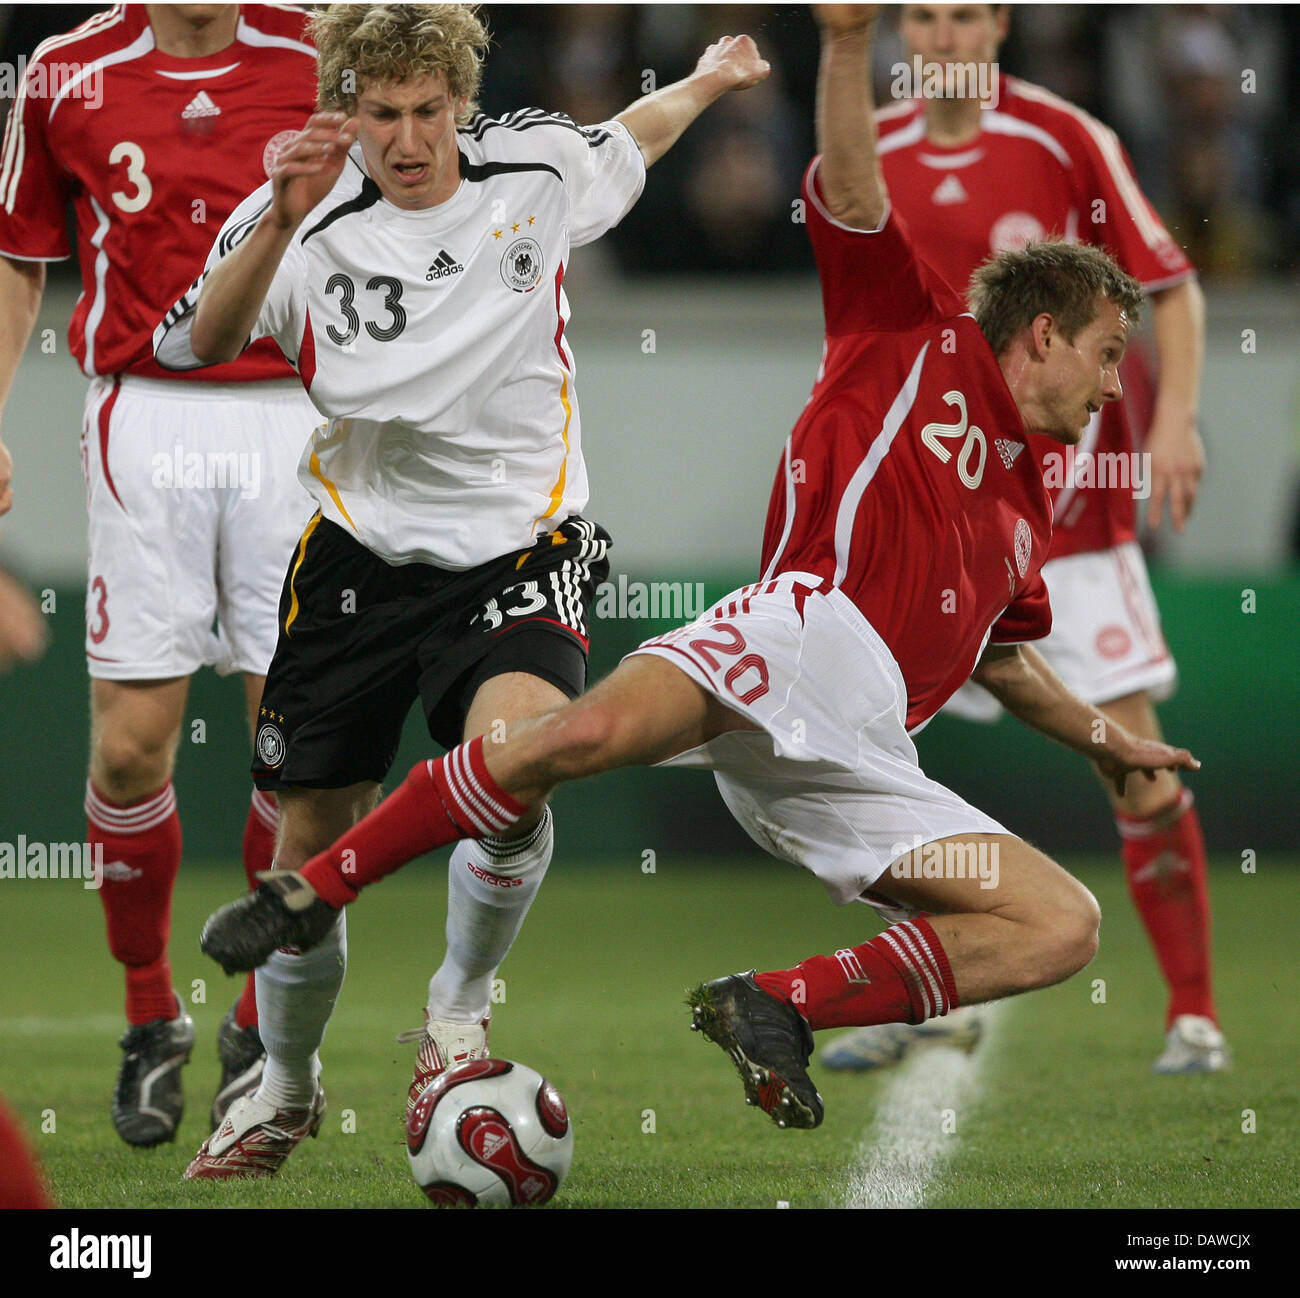 German national team player Stefan Kiessling (L) dribbles the ball during the international friendly against Denmark at the MSV-Arena stadium in Duisburg, Germany, Wednesday, 28 March 2007. Photo: Achim Scheidemann Stock Photo